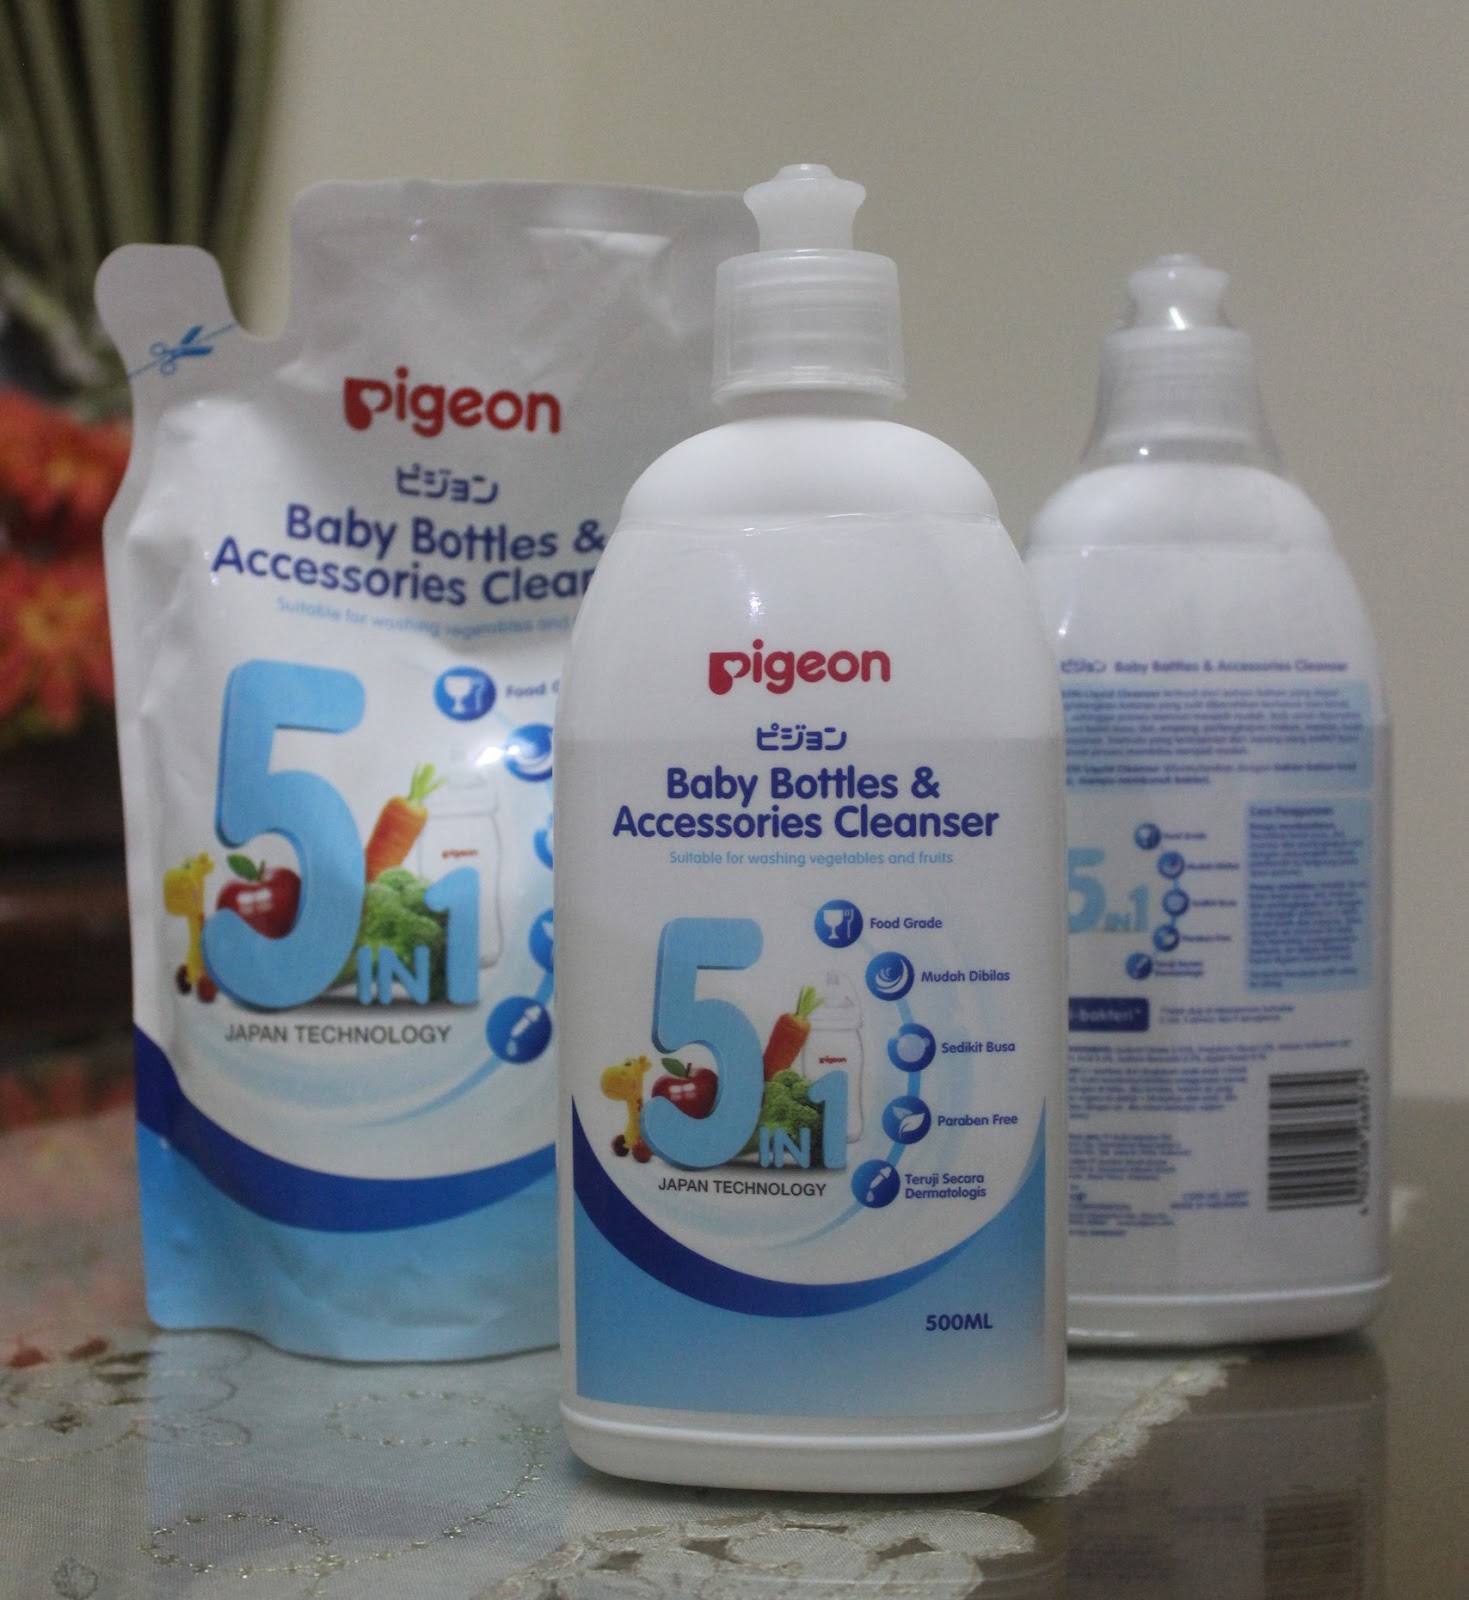 Pigeon Baby Bottles and Accessories Cleanser